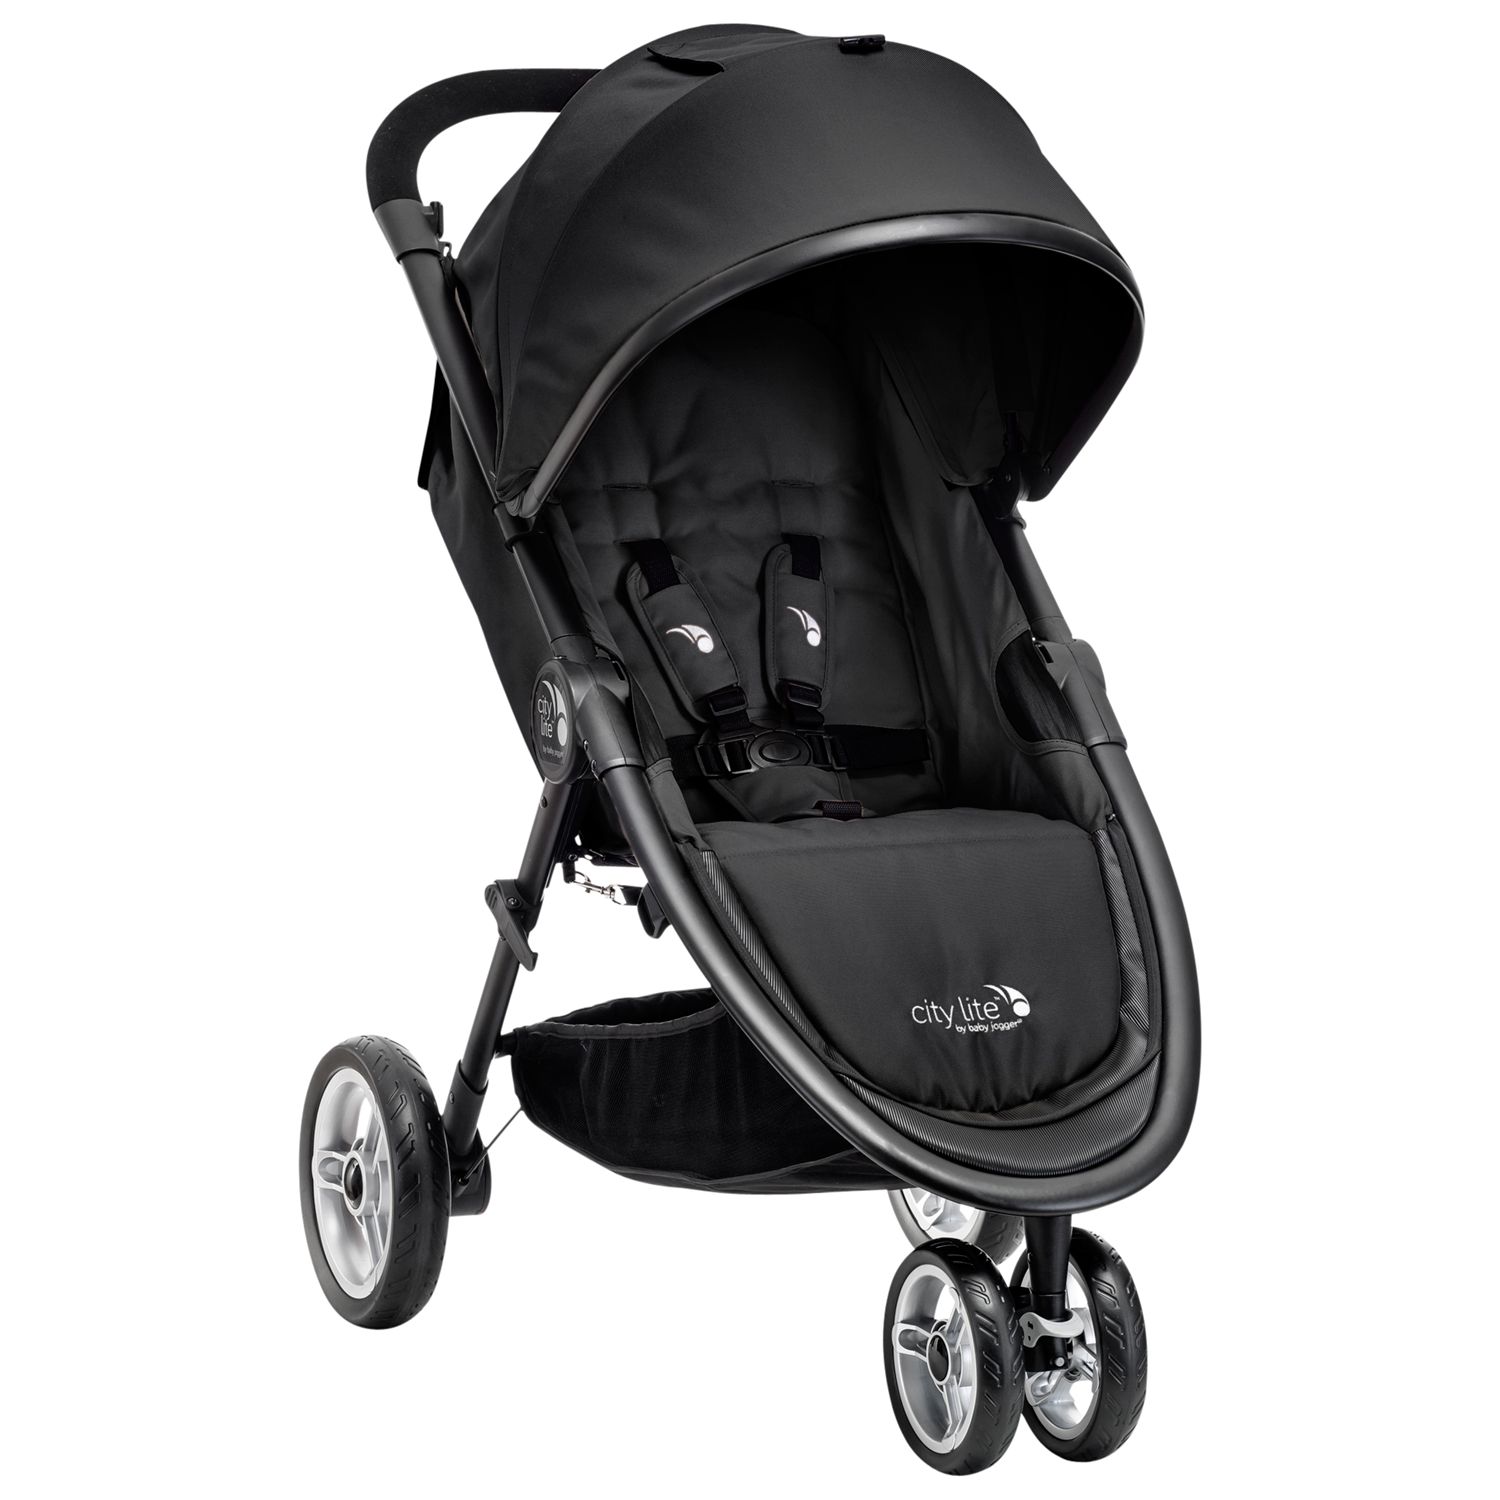 pushchair for 4 month old